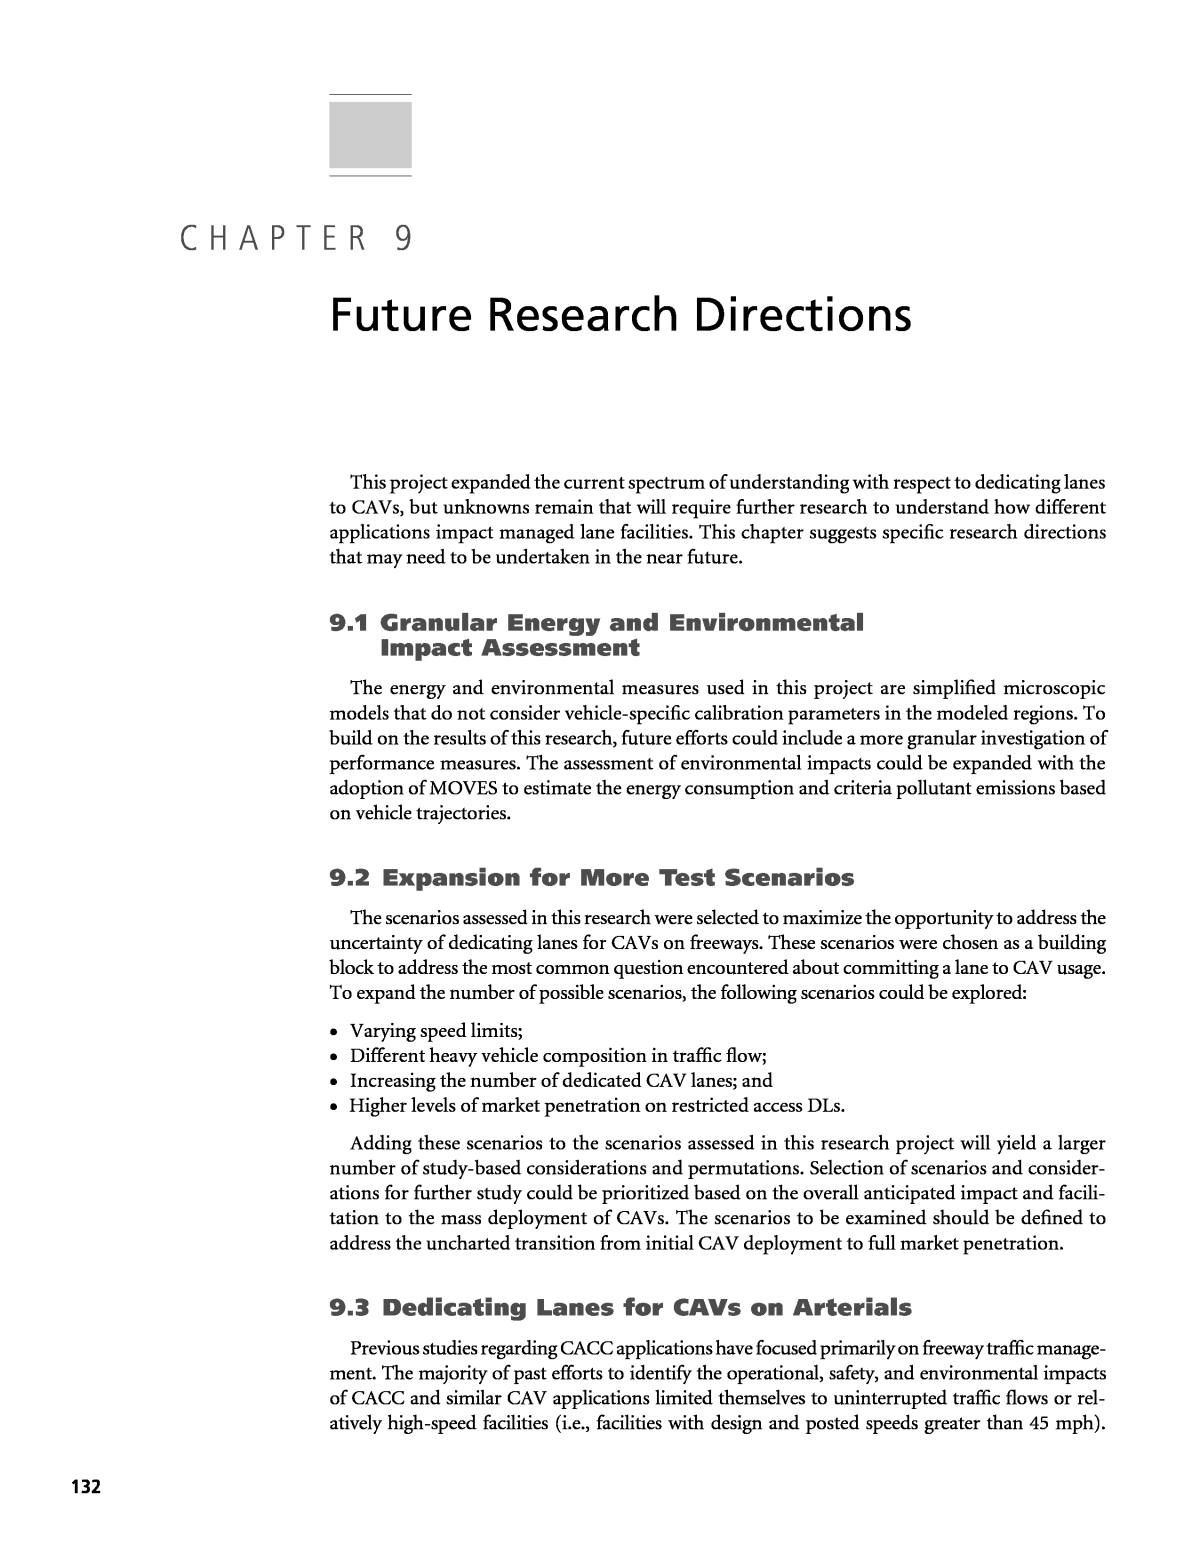 examples of future research directions